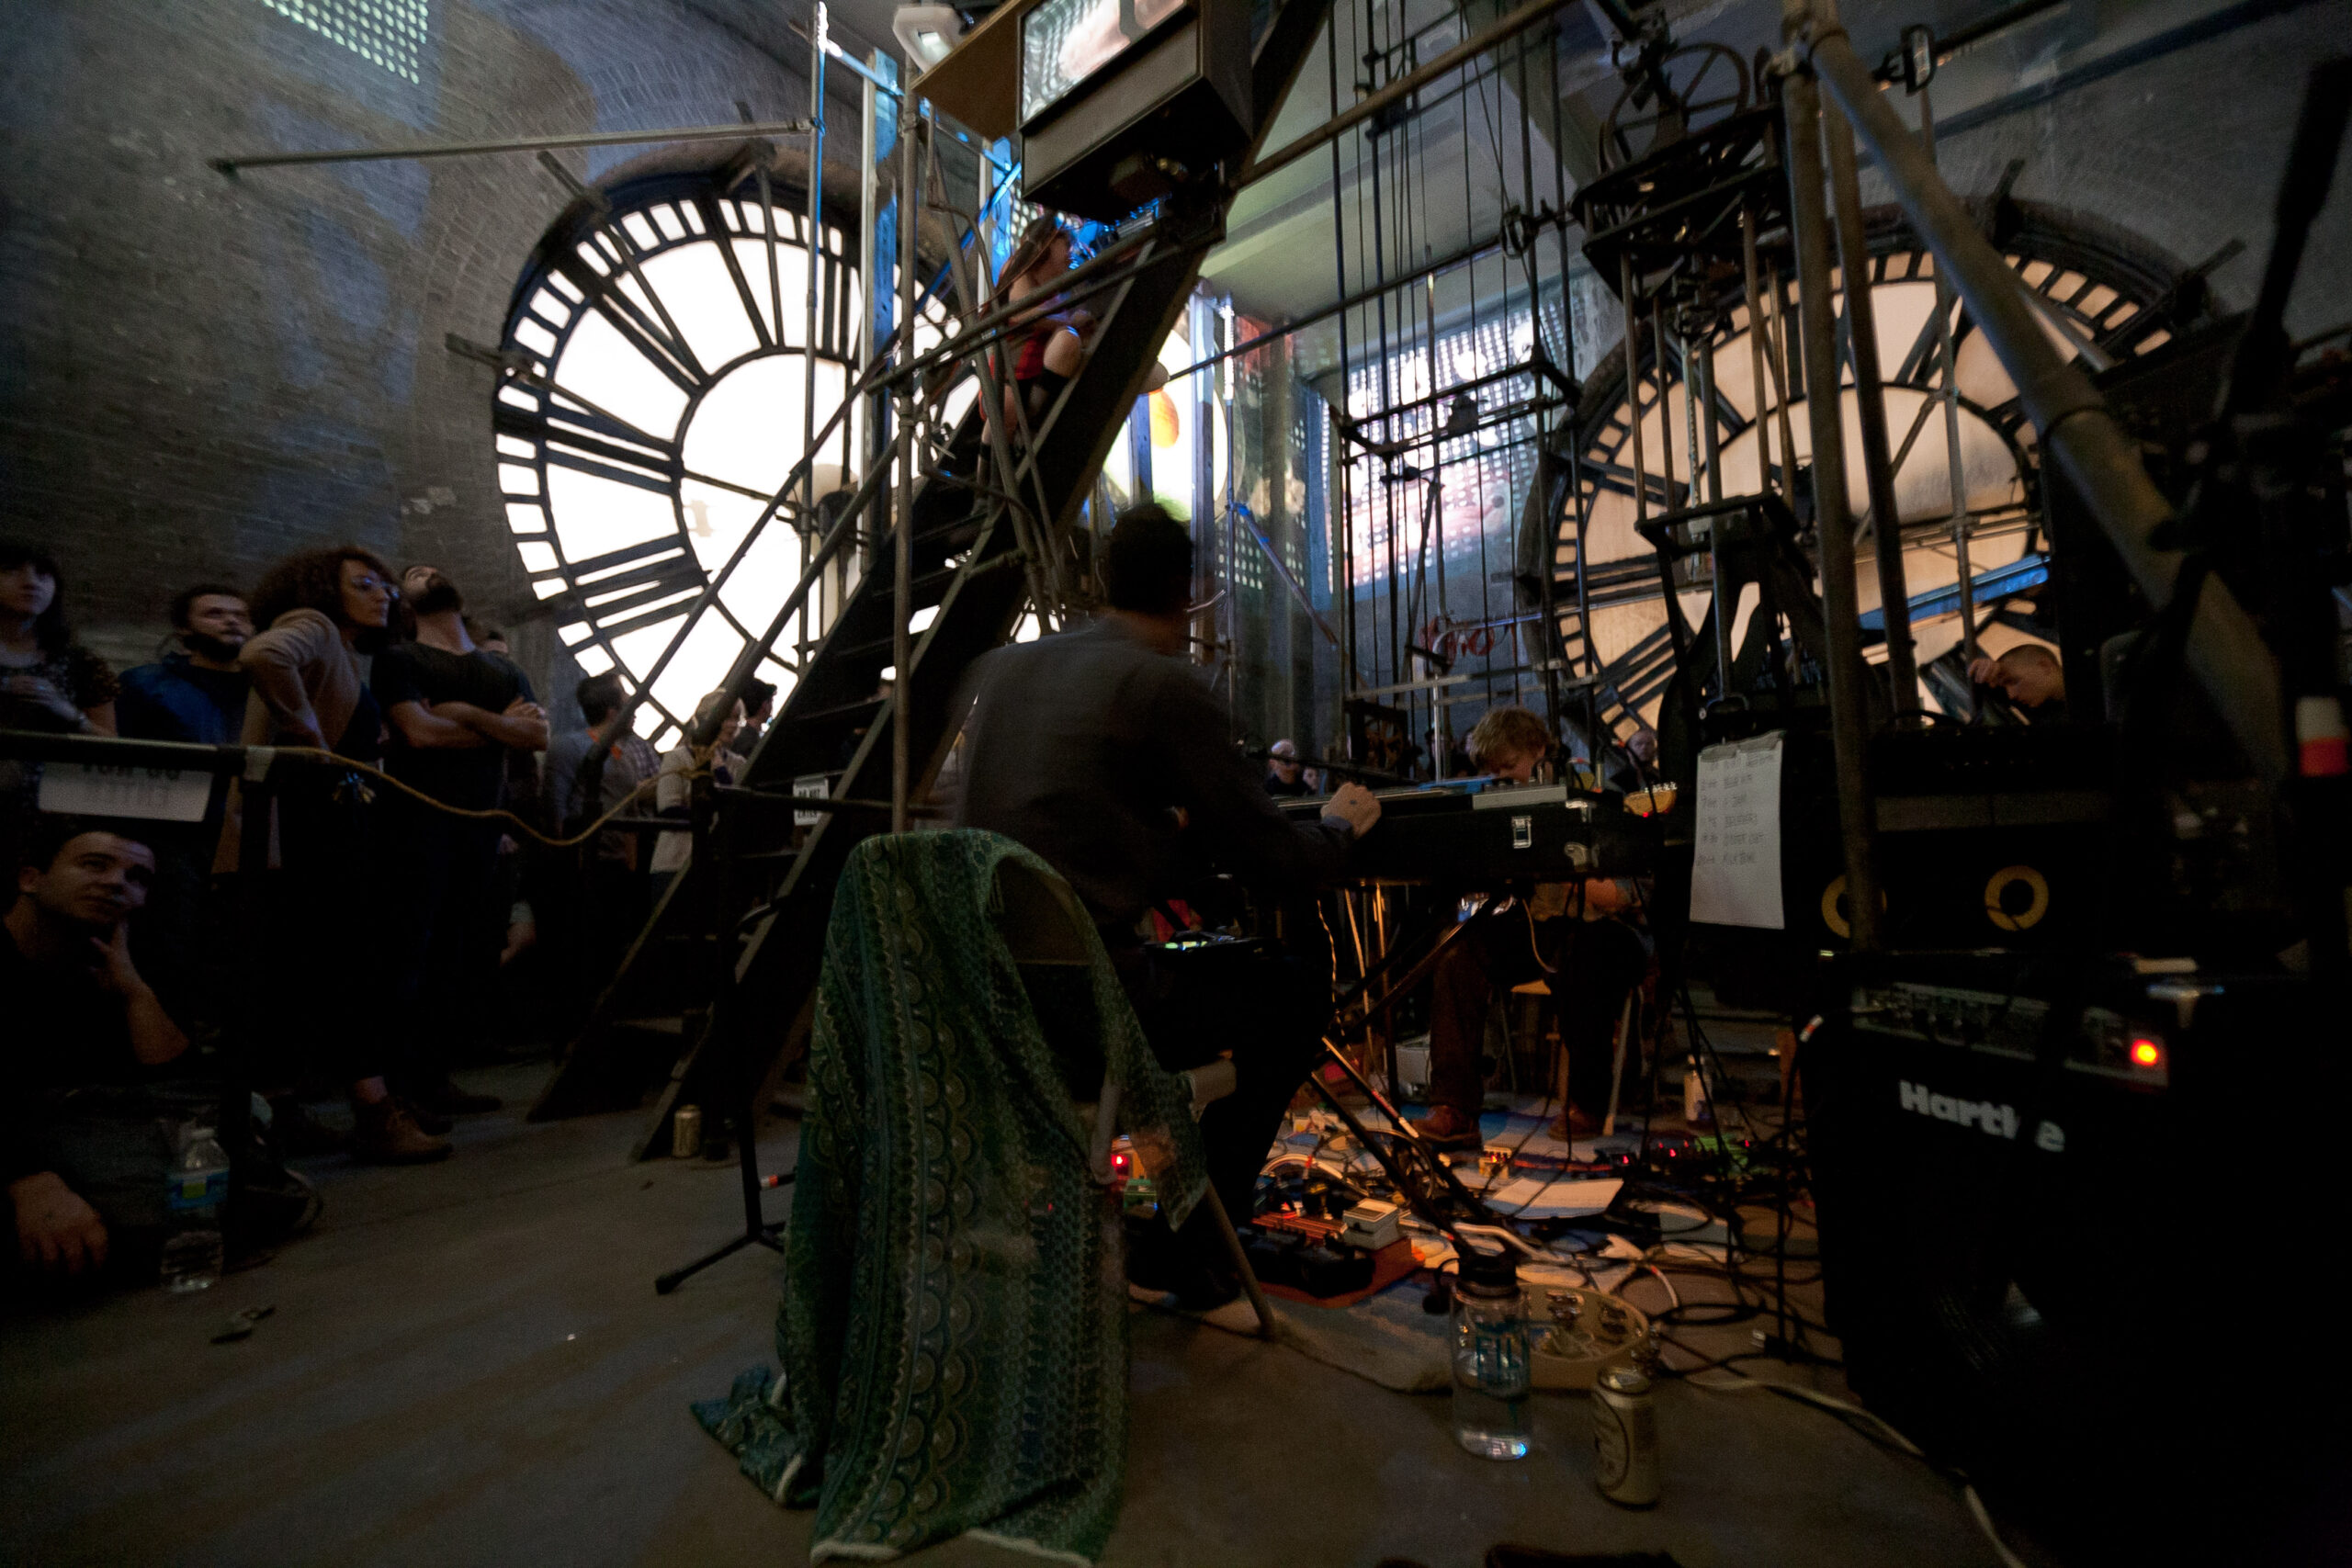 Peals performing Time is a Milk Bowl inside the Bromo Seltzer Tower clock room